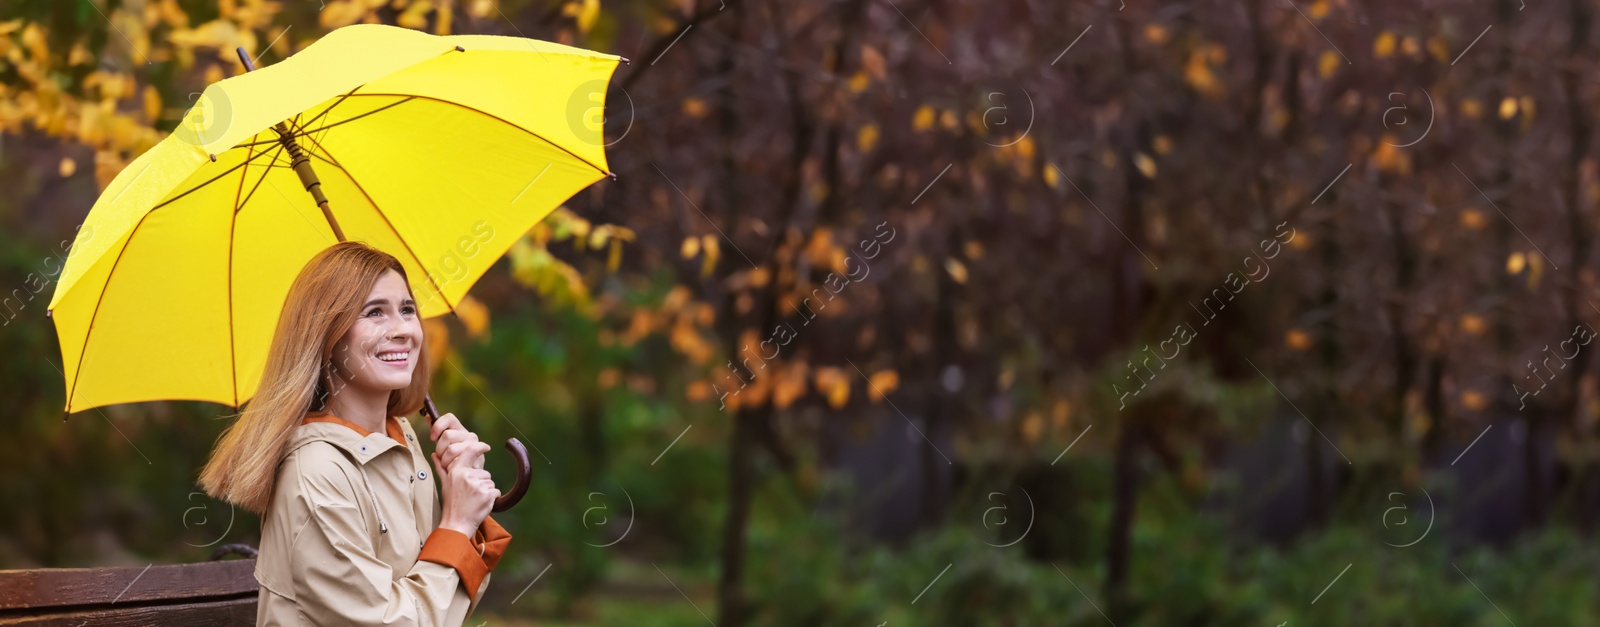 Image of Happy woman with umbrella sitting on bench in autumn park on rainy day, space for text. Banner design